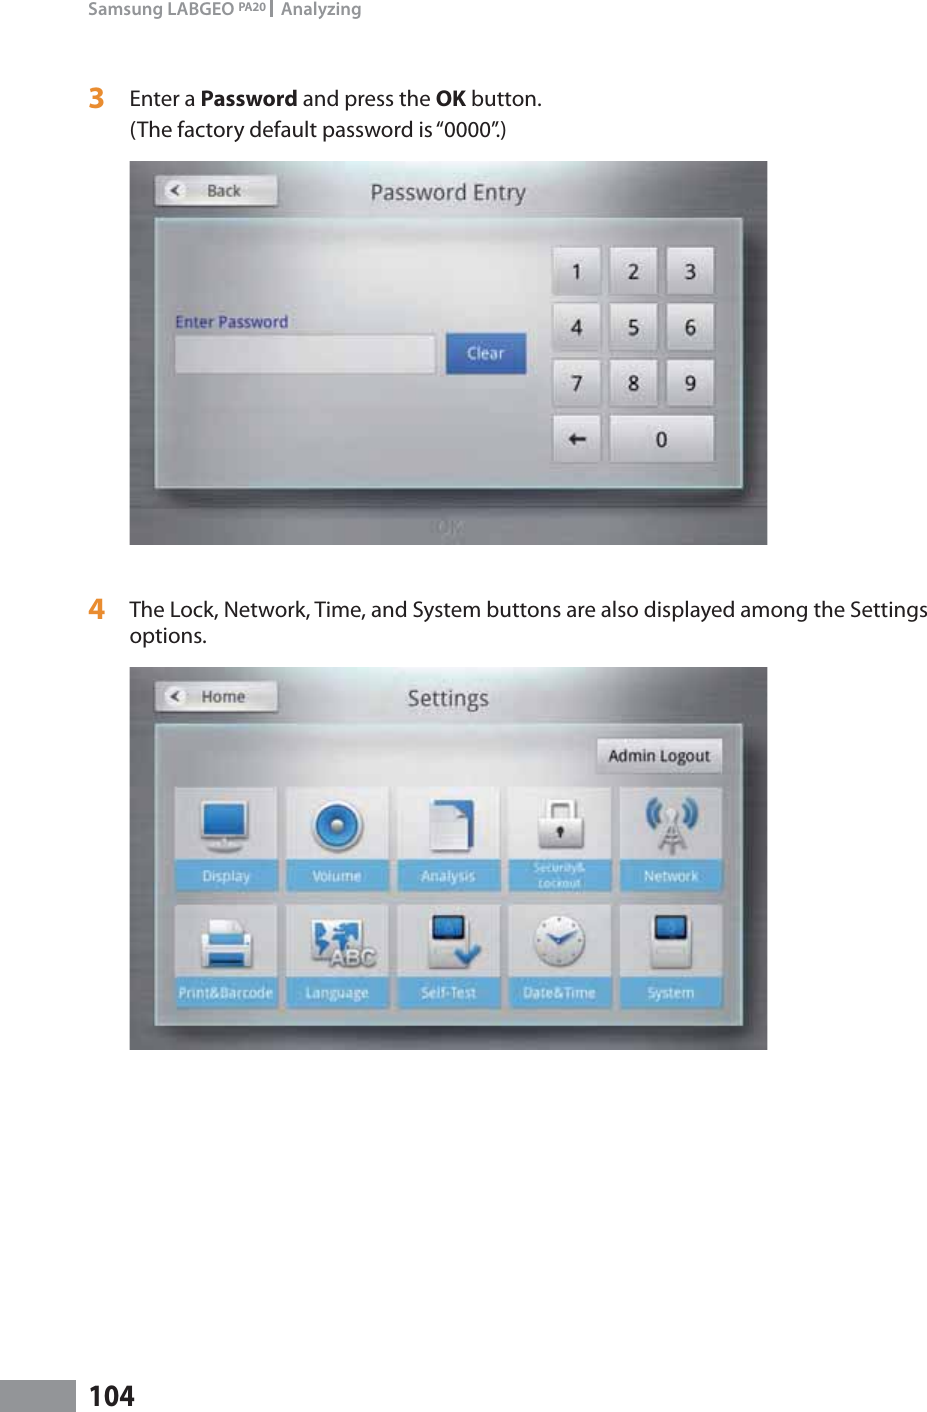 104Samsung LABGEO PA20   Analyzing3  Enter a Password and press the OK button. (The factory default password is “0000”.)4  The Lock, Network, Time, and System buttons are also displayed among the Settings options.